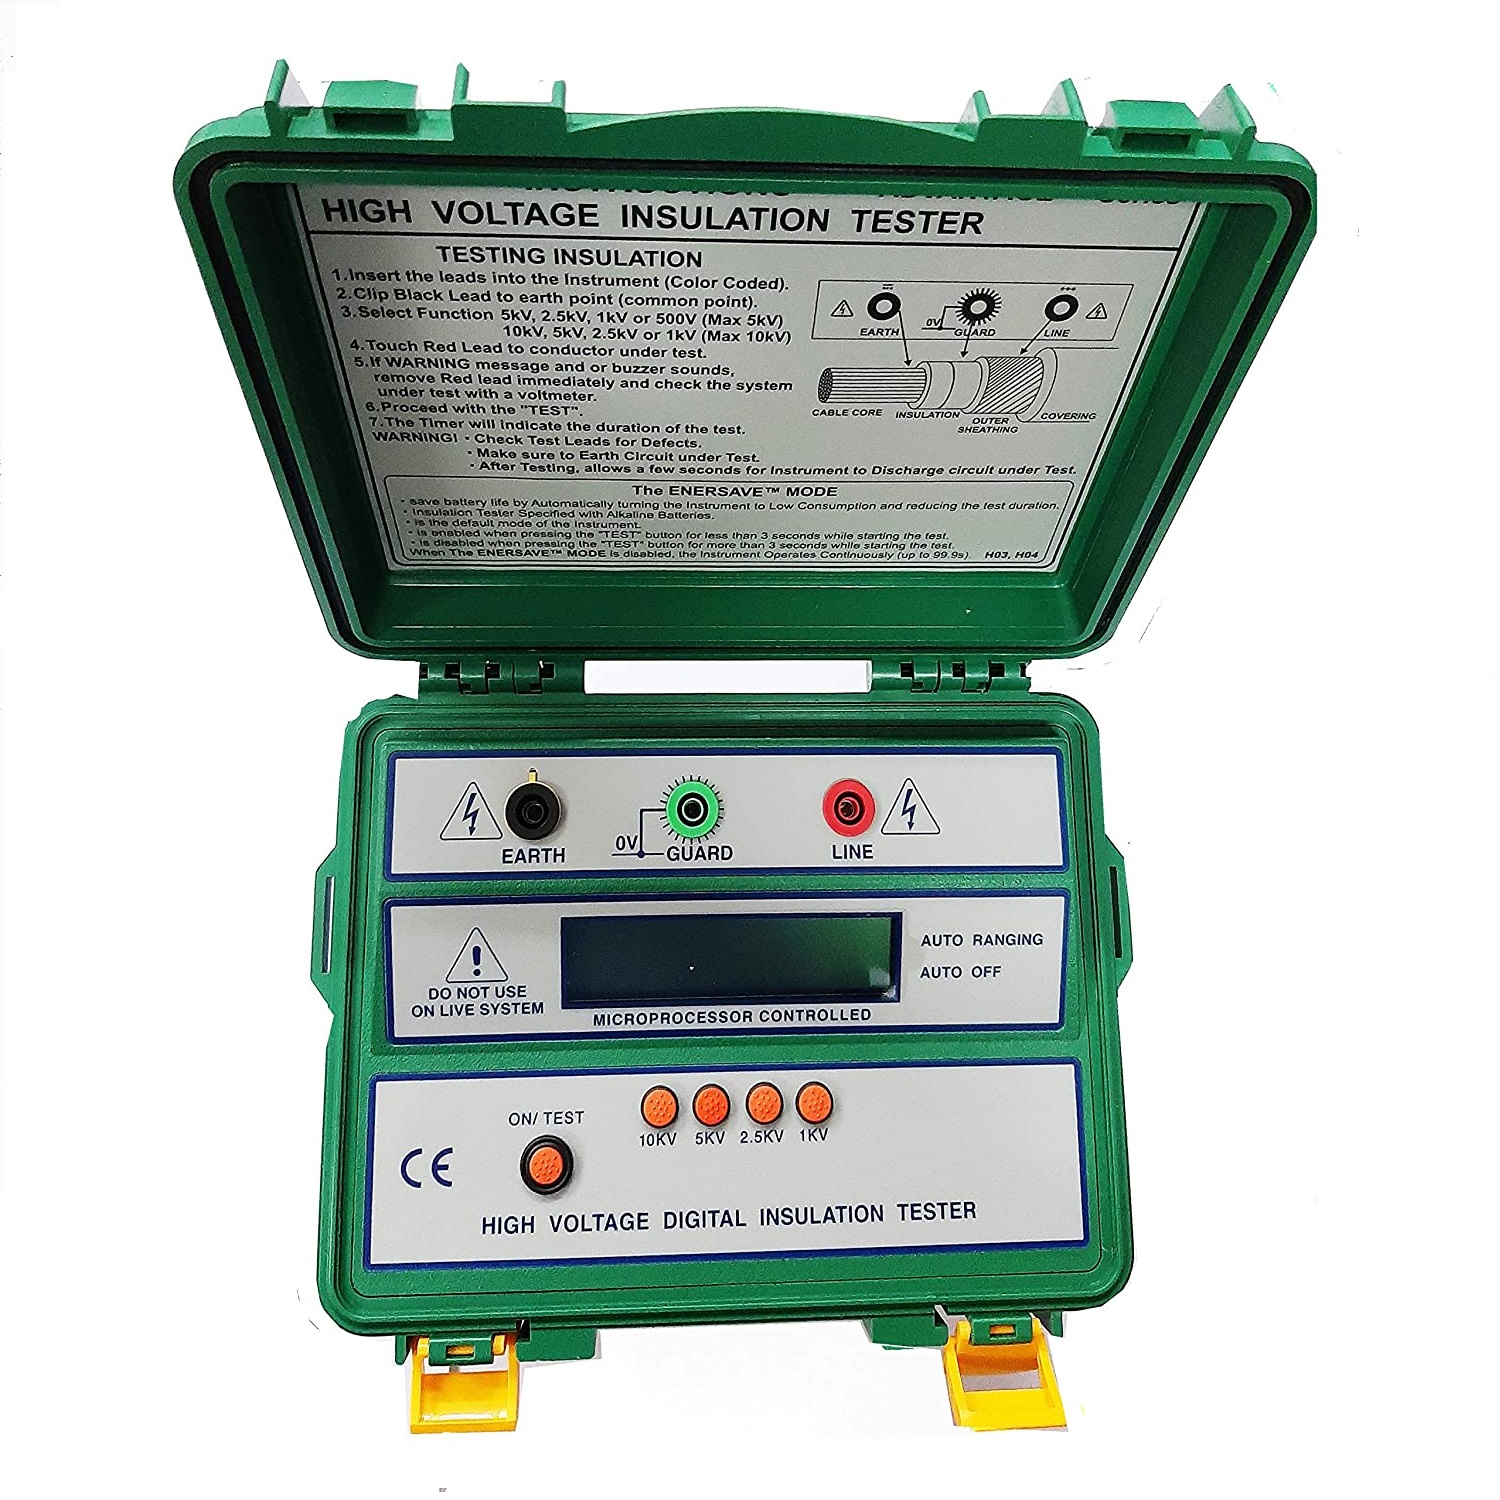 Metravi DIT-915 Auto-ranging Digital Insulation Tester with Overload Protection